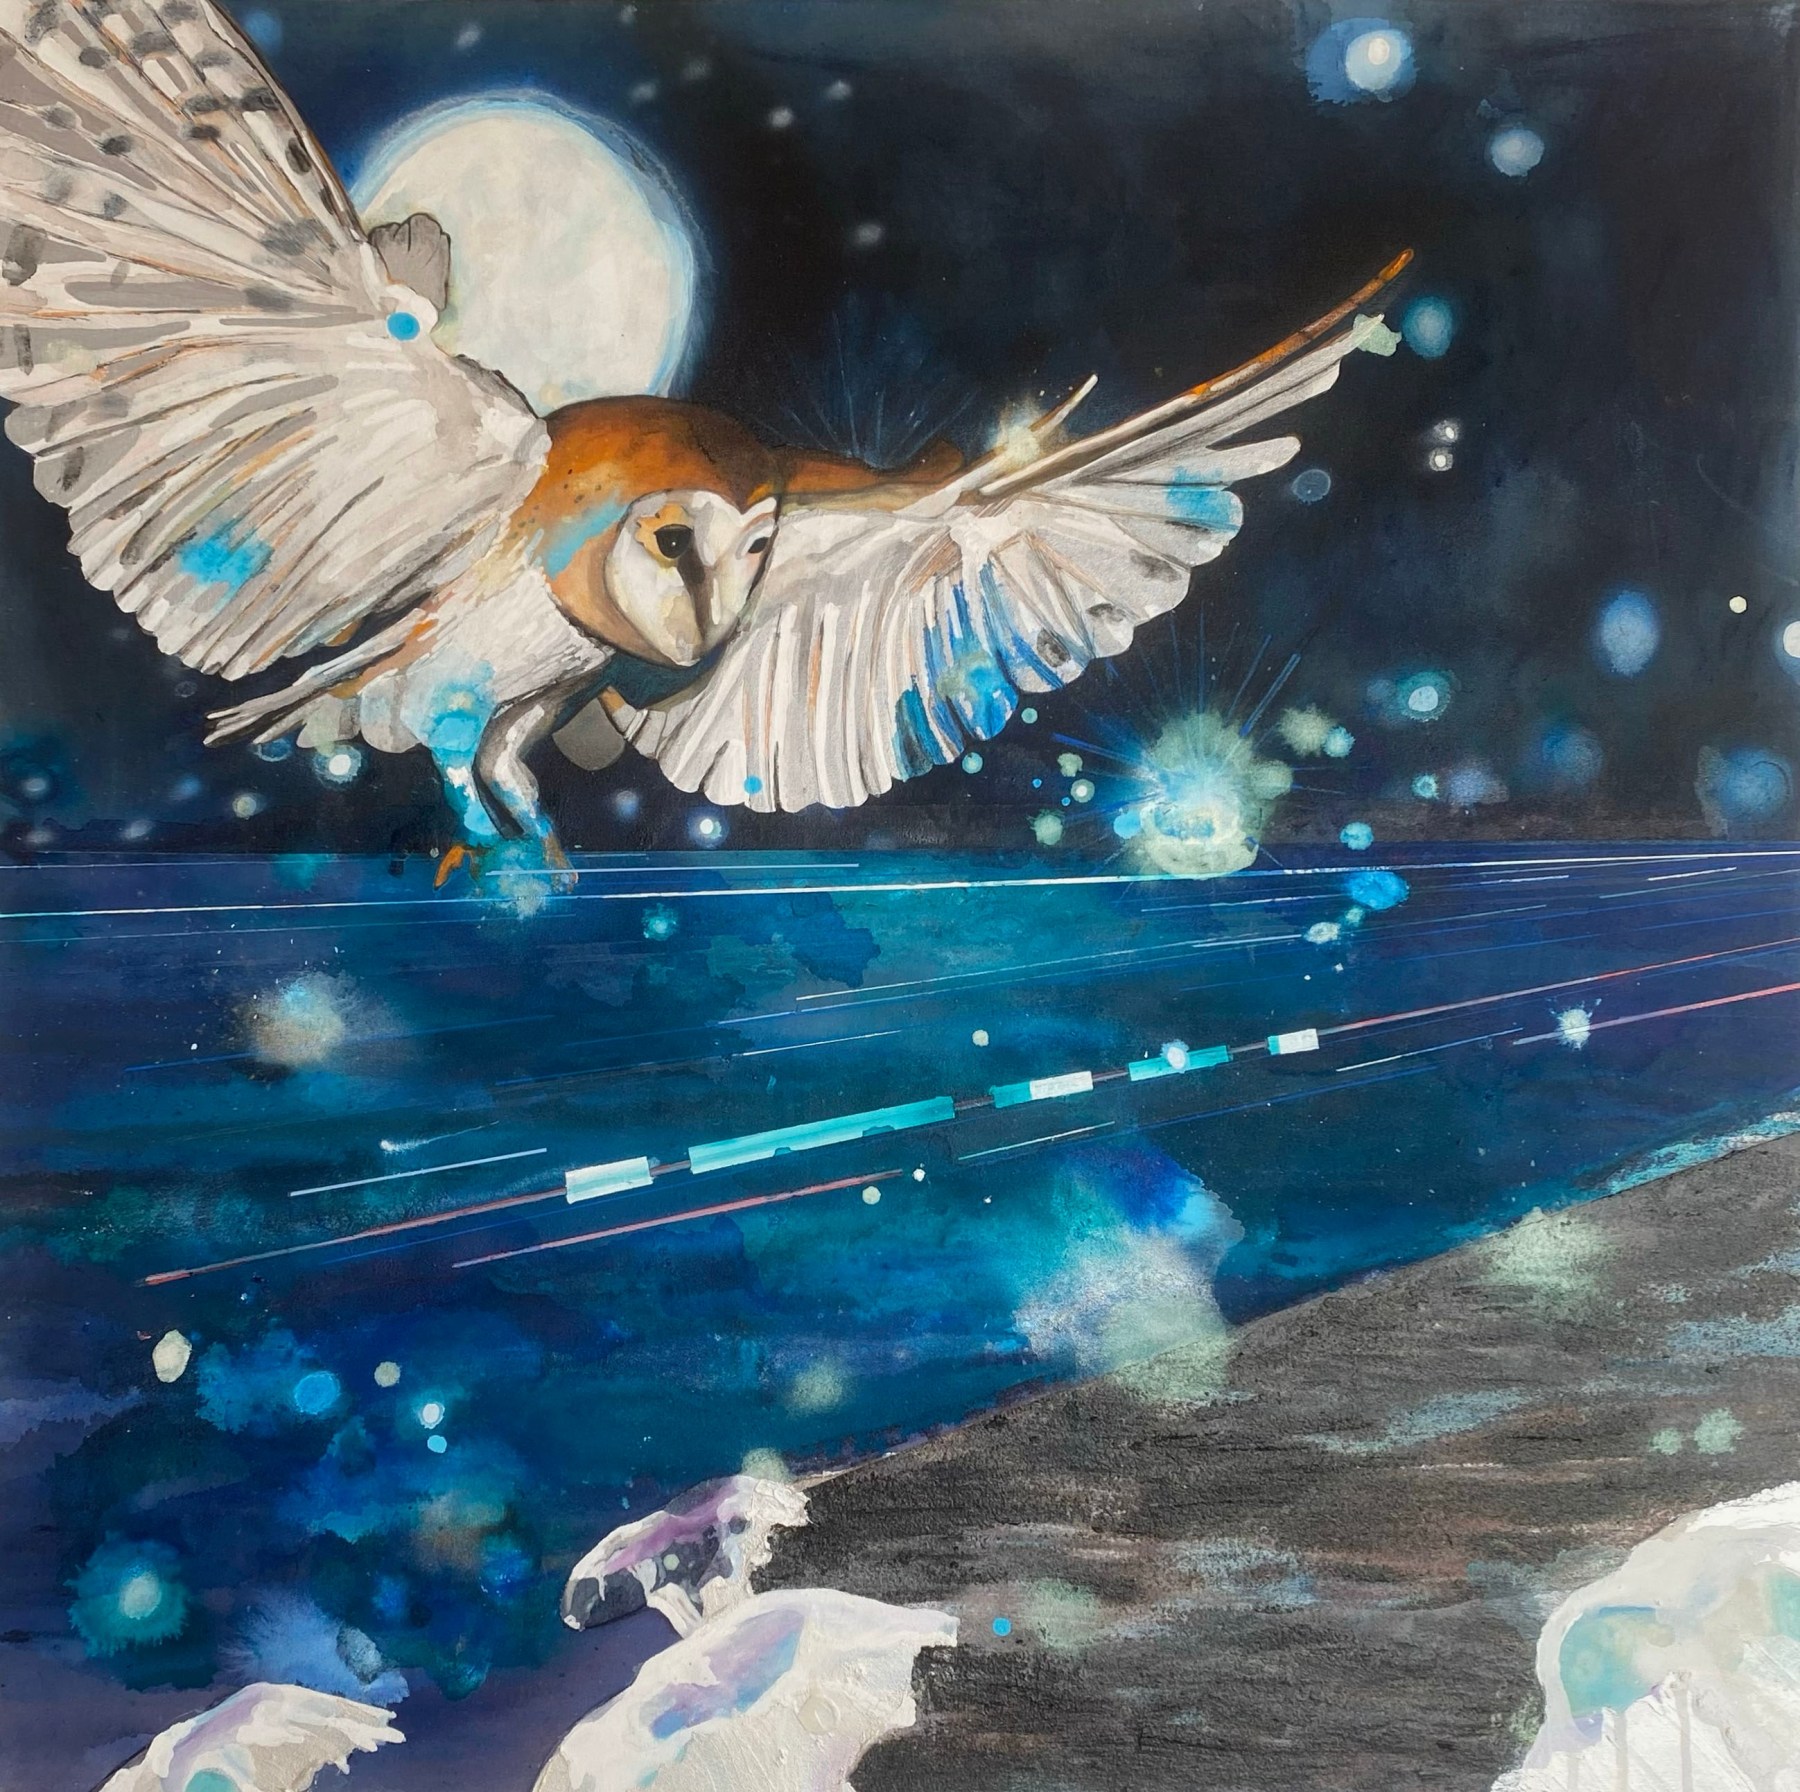 A painting by artist Jenny Day of an owl in flight over a cosmic landscape with celestial elements and the moon in the background.